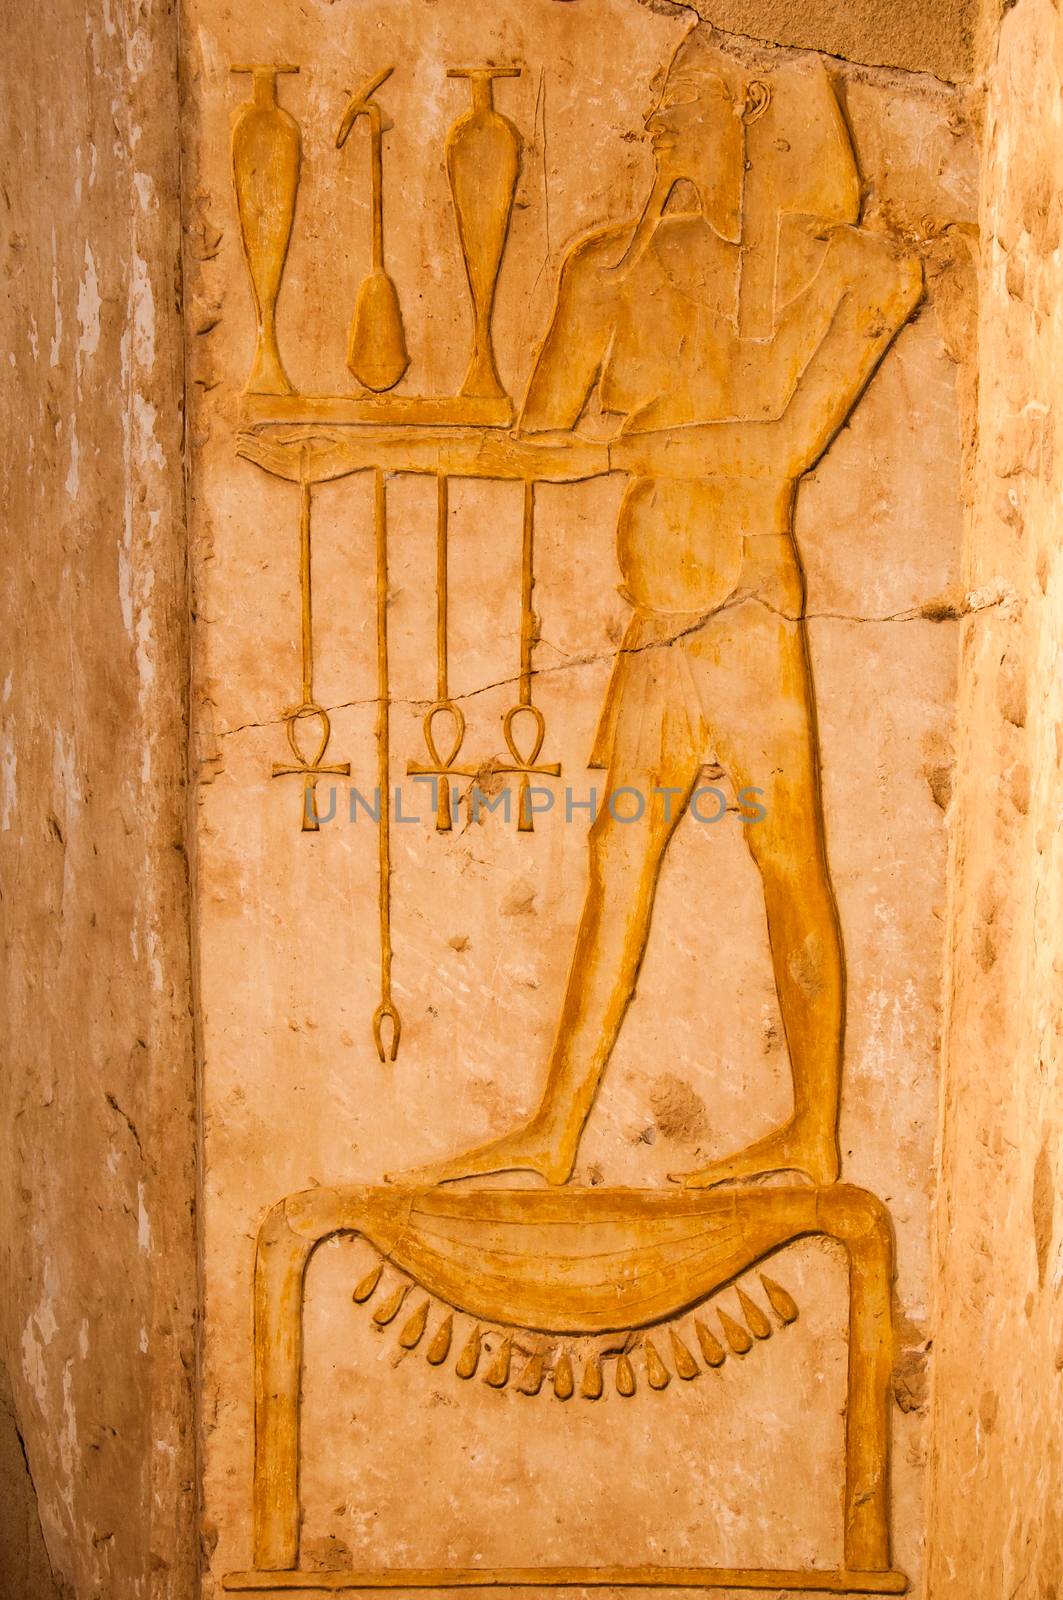 Ancient hieroglyphs carved in stone, Queen Hatshepsut temple, Eg by martinm303